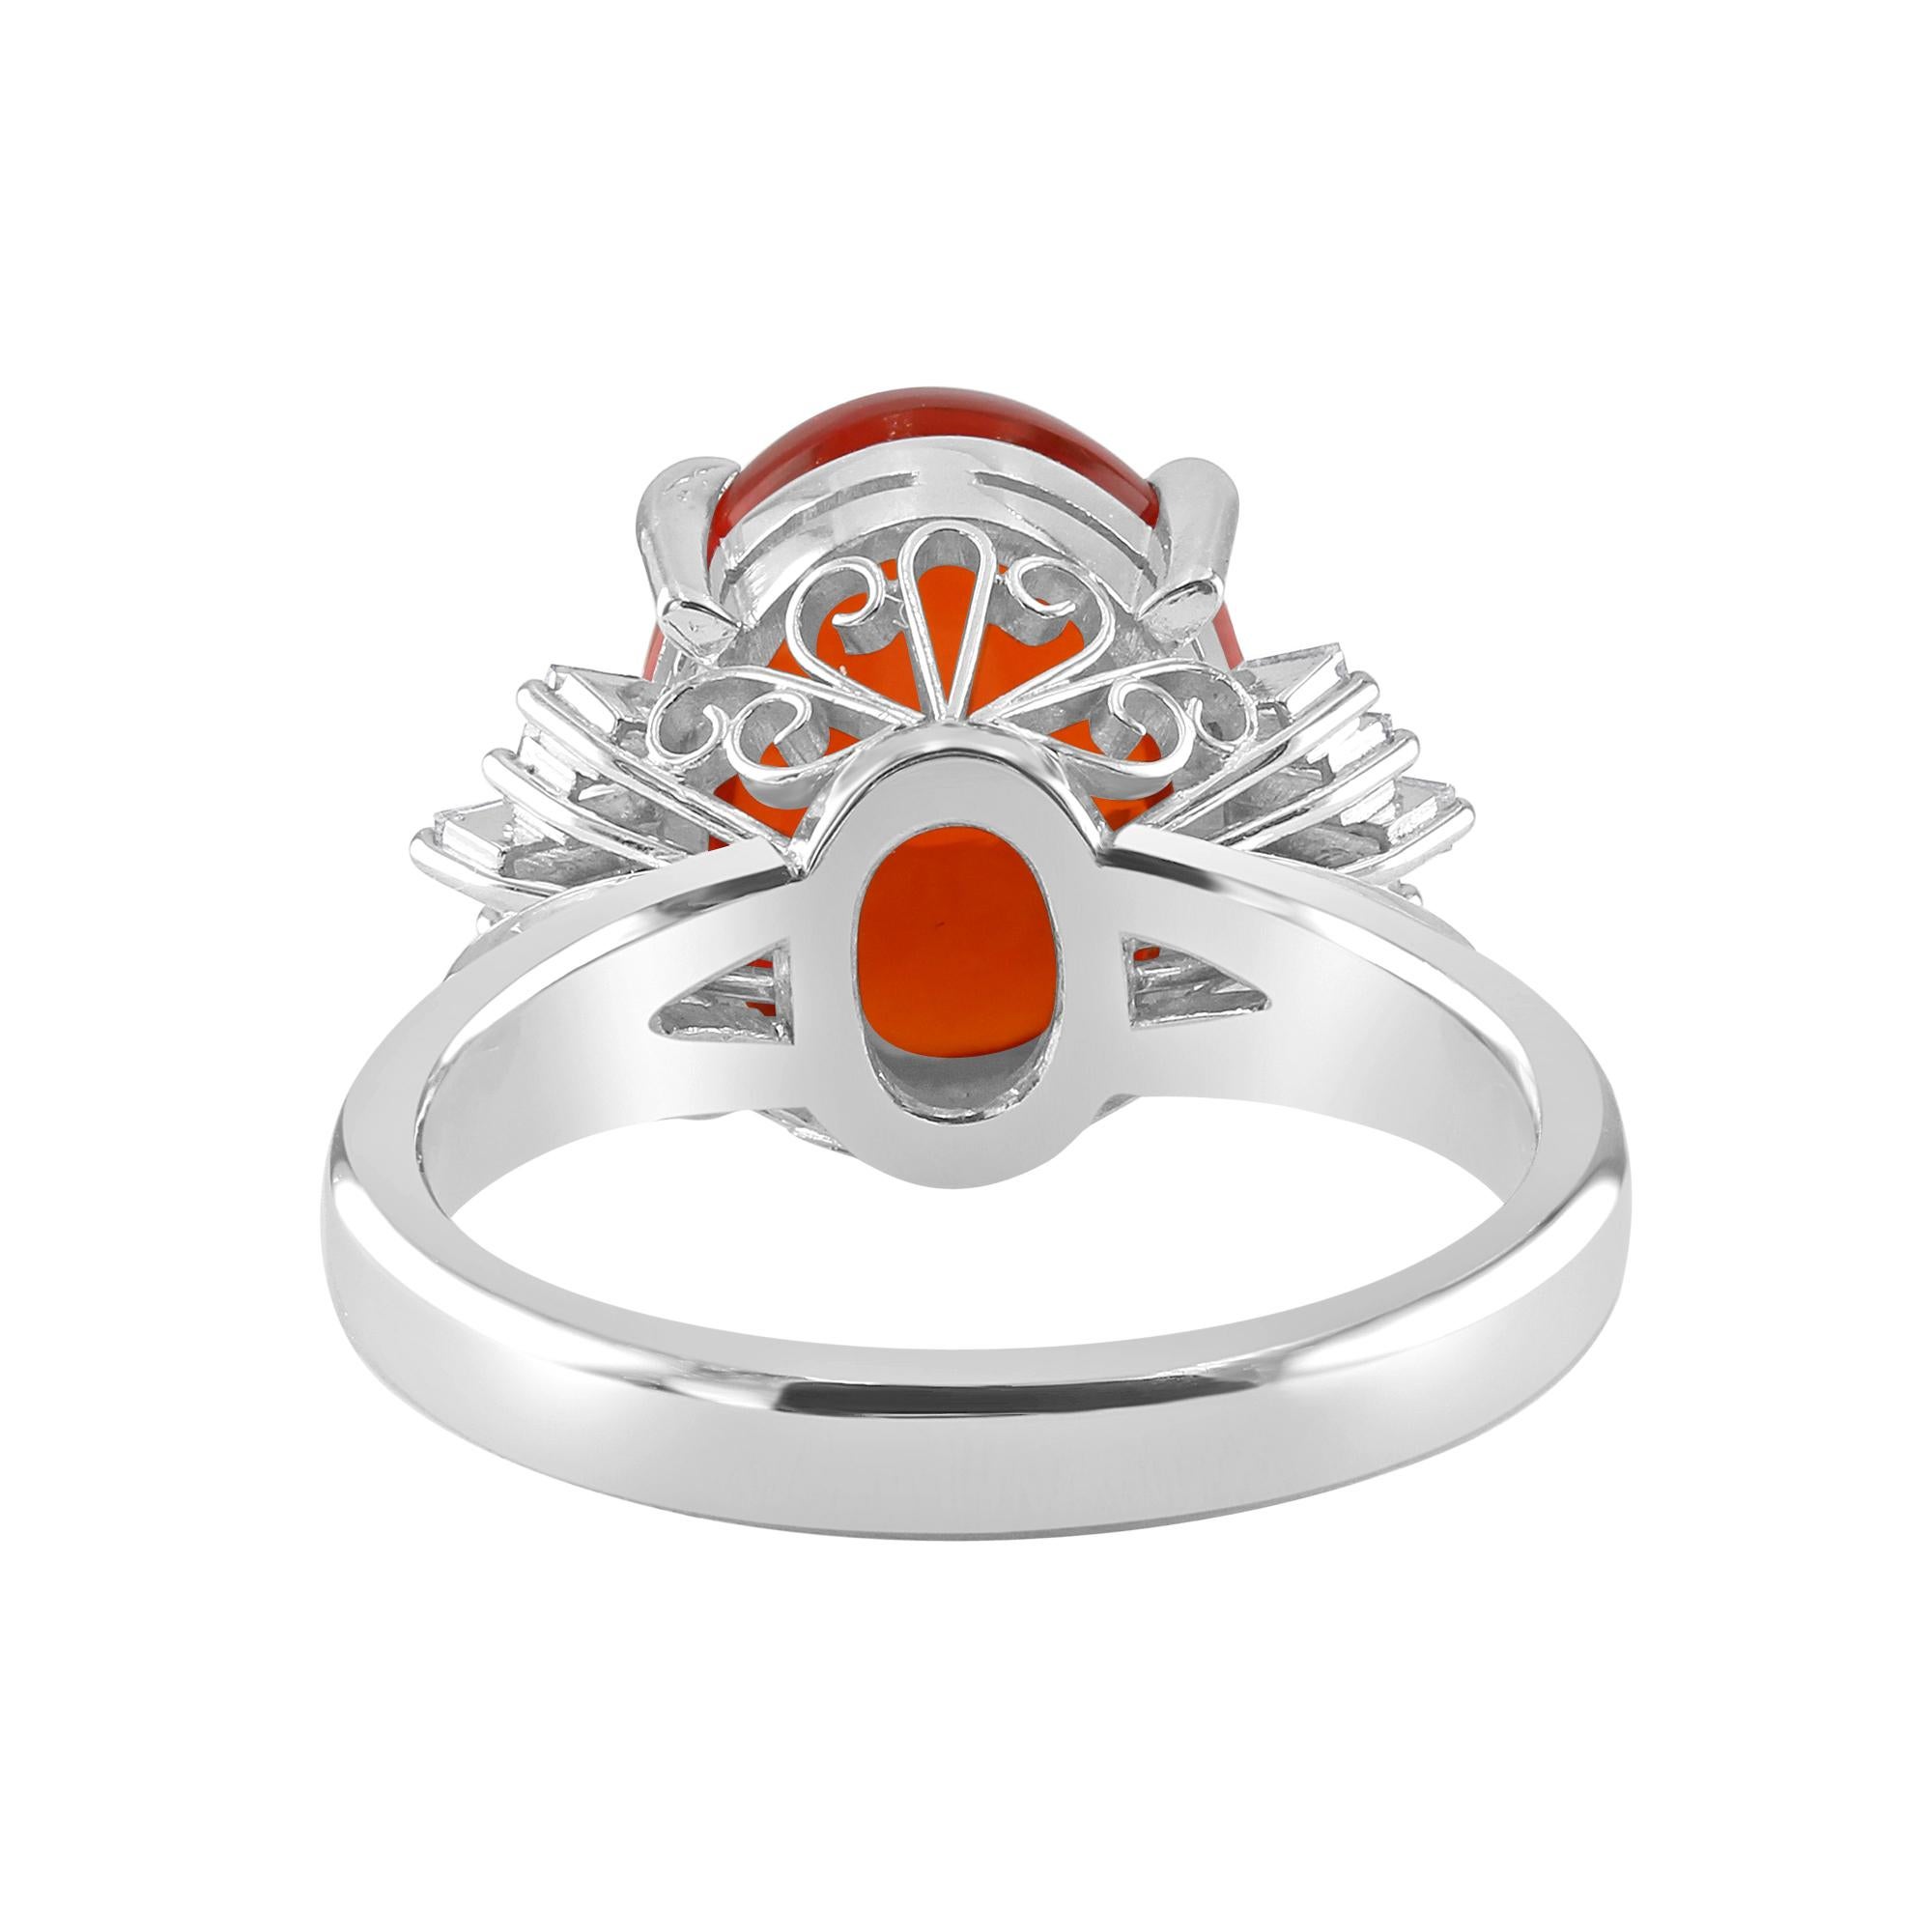 3.92 ct of Fine Mexican Opal, set with 0.28 ct of tapered baguettes and diamonds. 

With its exquisite detail and color, this cocktail fire opal ring is sure to turn heads at any occasion. Fun, classy and beautiful one-of-a-kind accessory. 

Set in